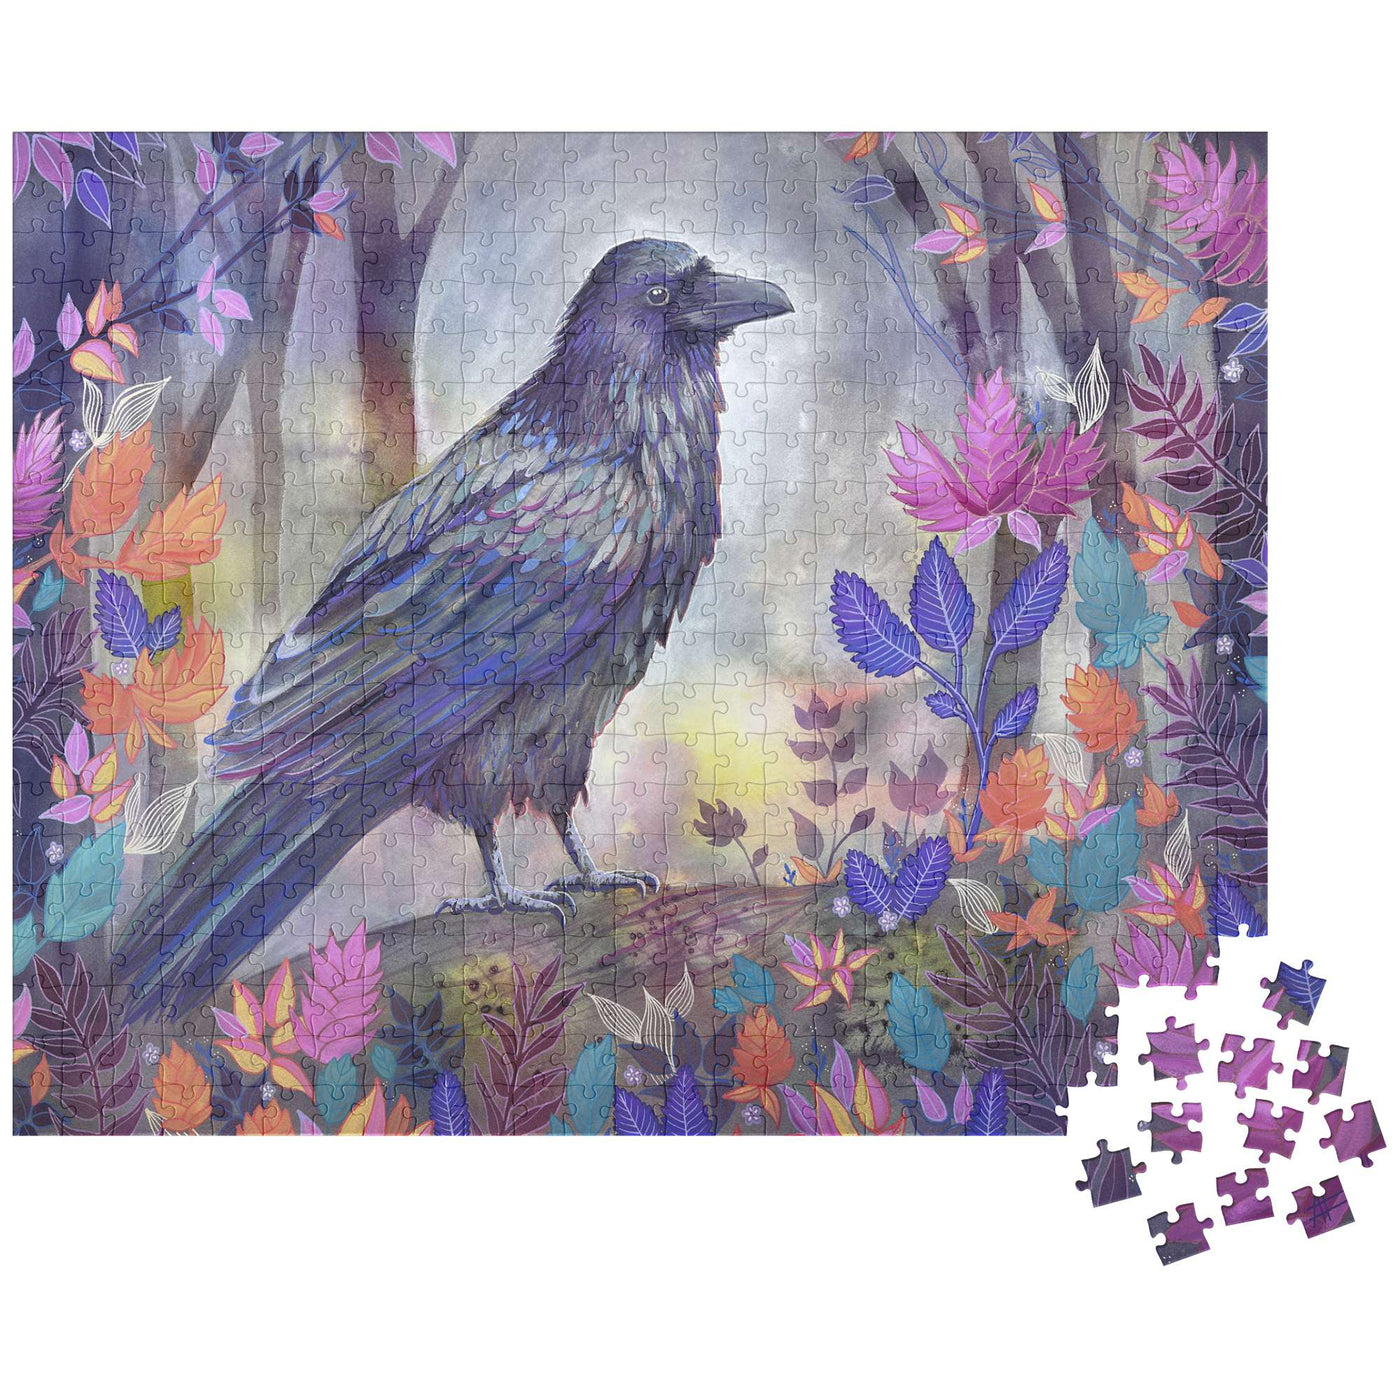 Raven Puzzle of a raven standing among colorful plants, with a few puzzle pieces yet to be placed.